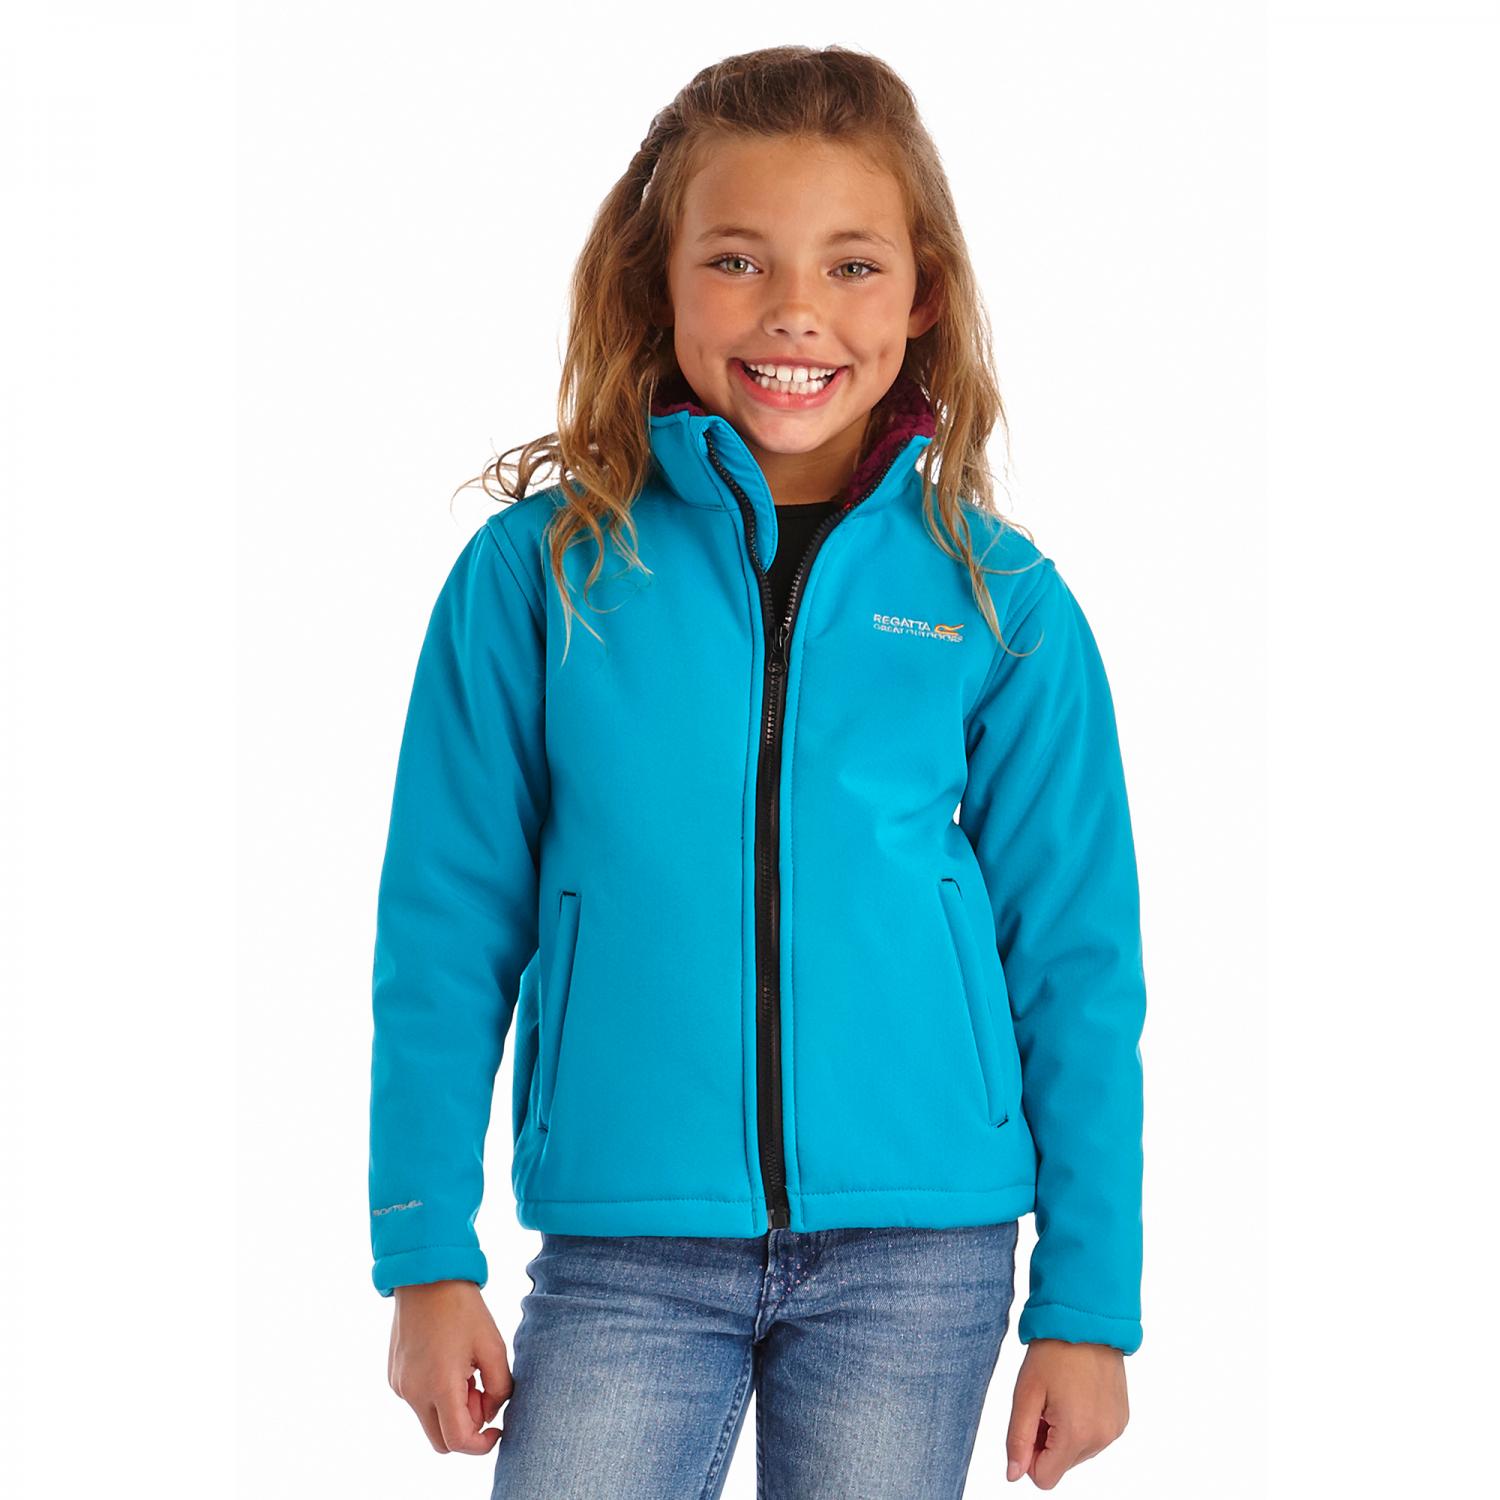 Boss Model Juniors: GET WRAPPED UP WITH REGATTA!